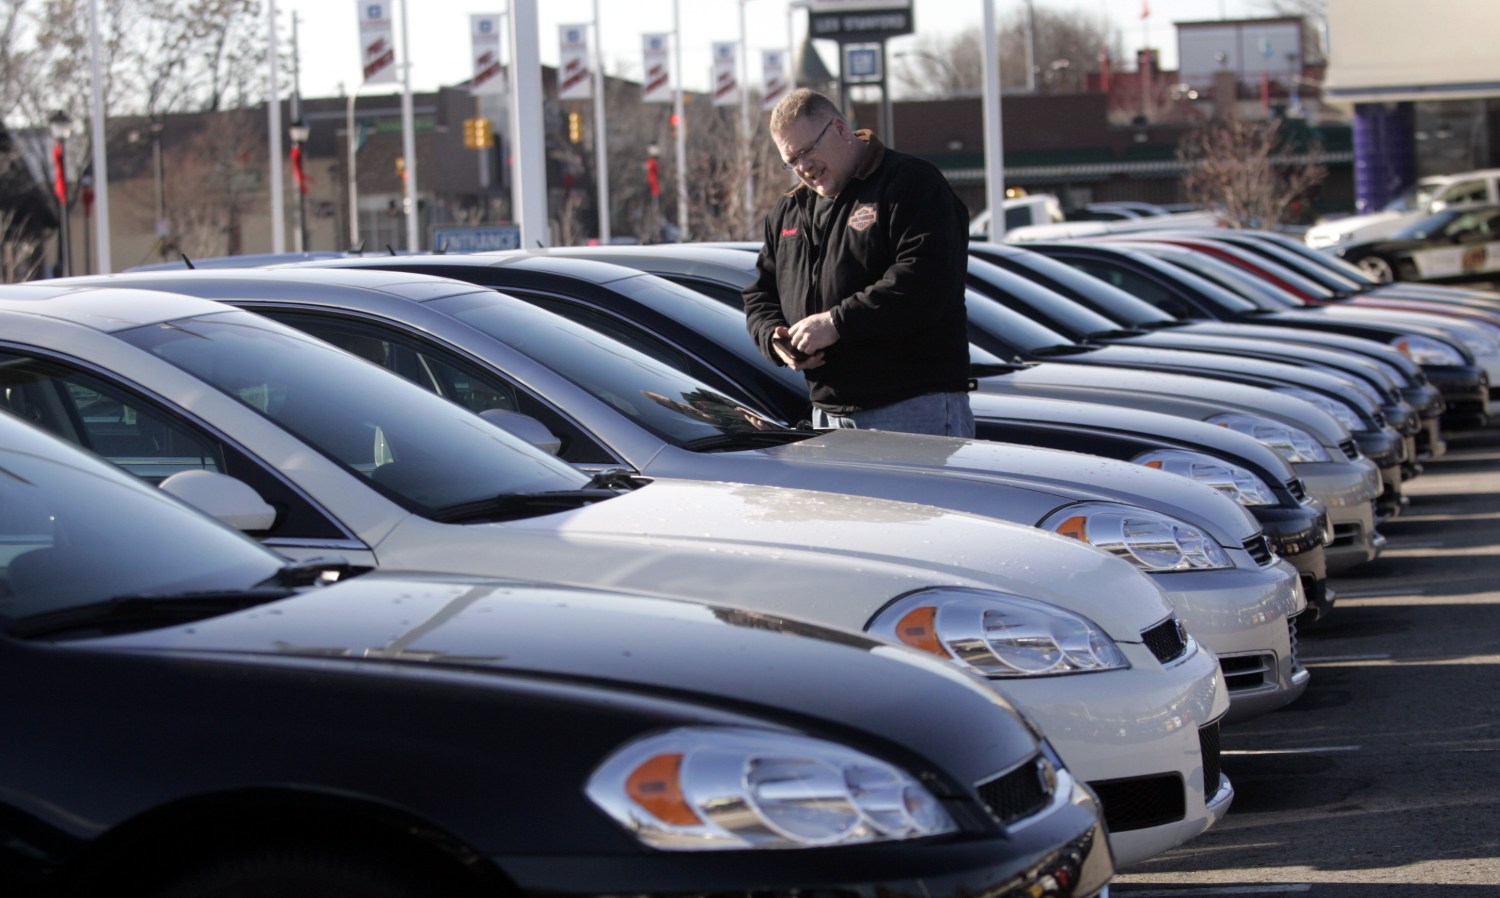 A potential customer looks at a 2009 Chevrolet Impala sedan at a car dealership in Dearborn, Michigan December 29, 2008. General Motors and Chrysler are scheduled to each receive $4 billion of loan money today from the U.S. Treasury Department according to the terms of their agreement.  REUTERS/Rebecca Cook (UNITED STATES)